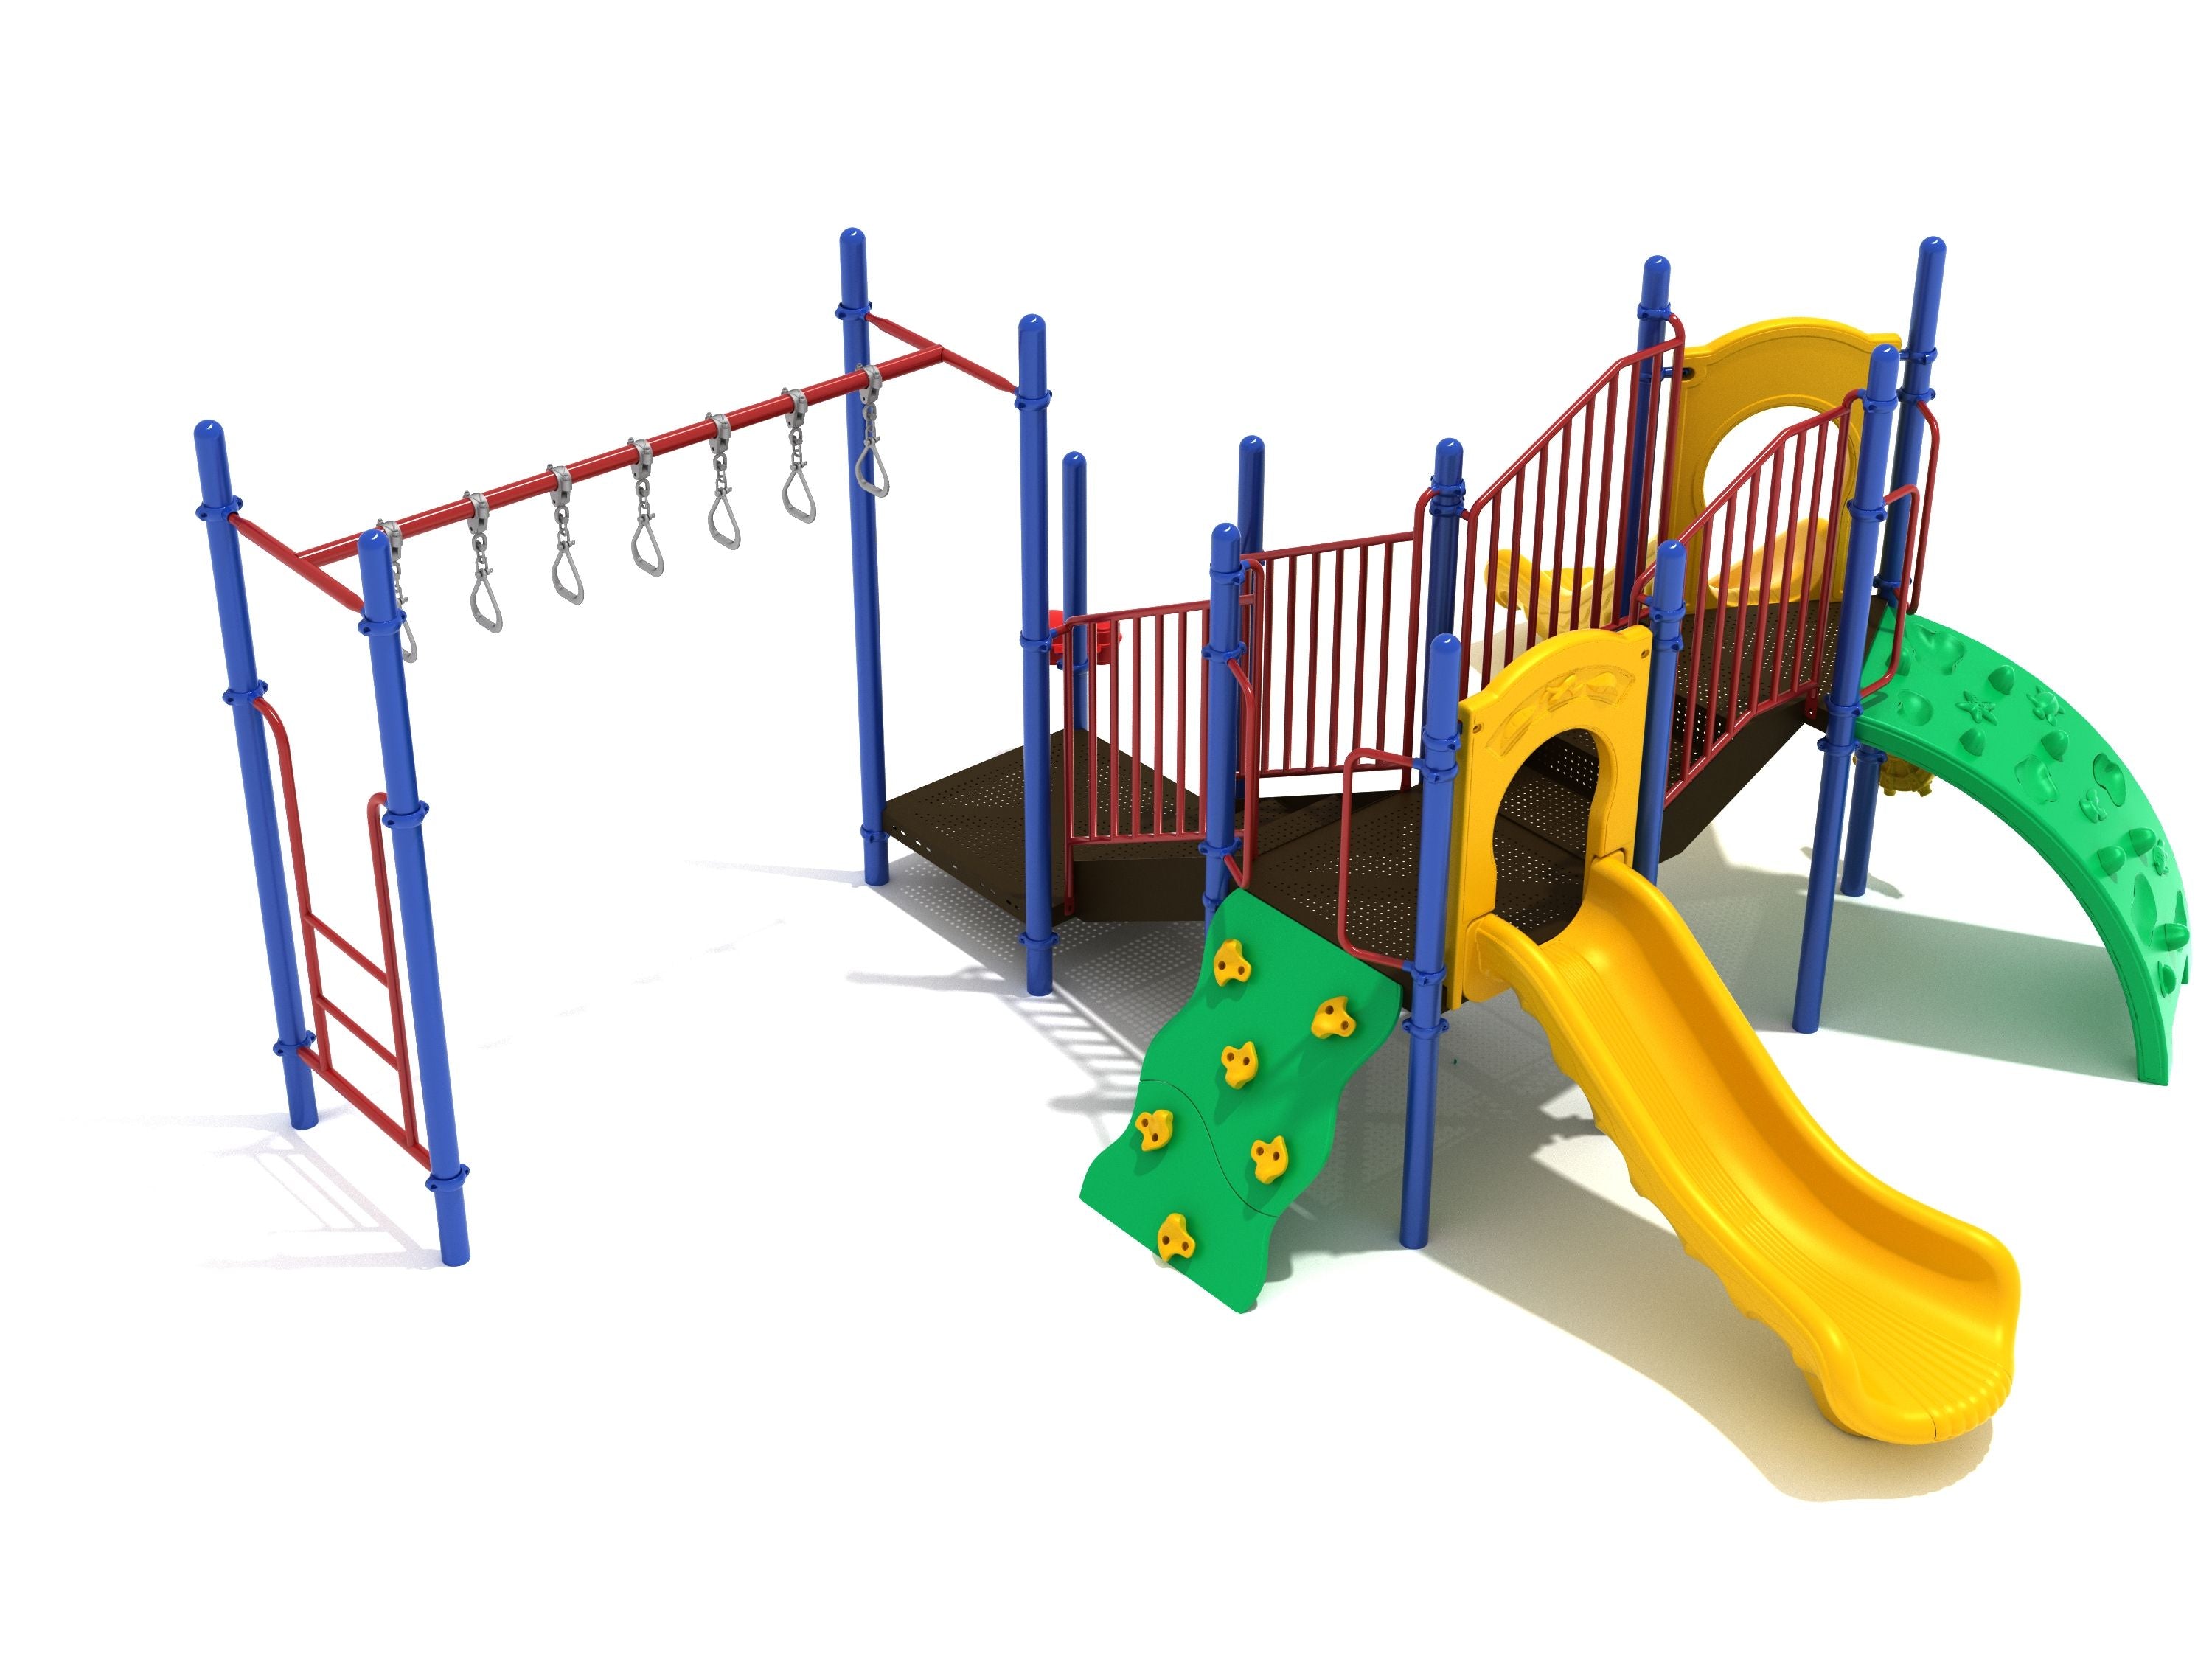 dog playscape (3 ramp) outdoor dog fun. In your colors